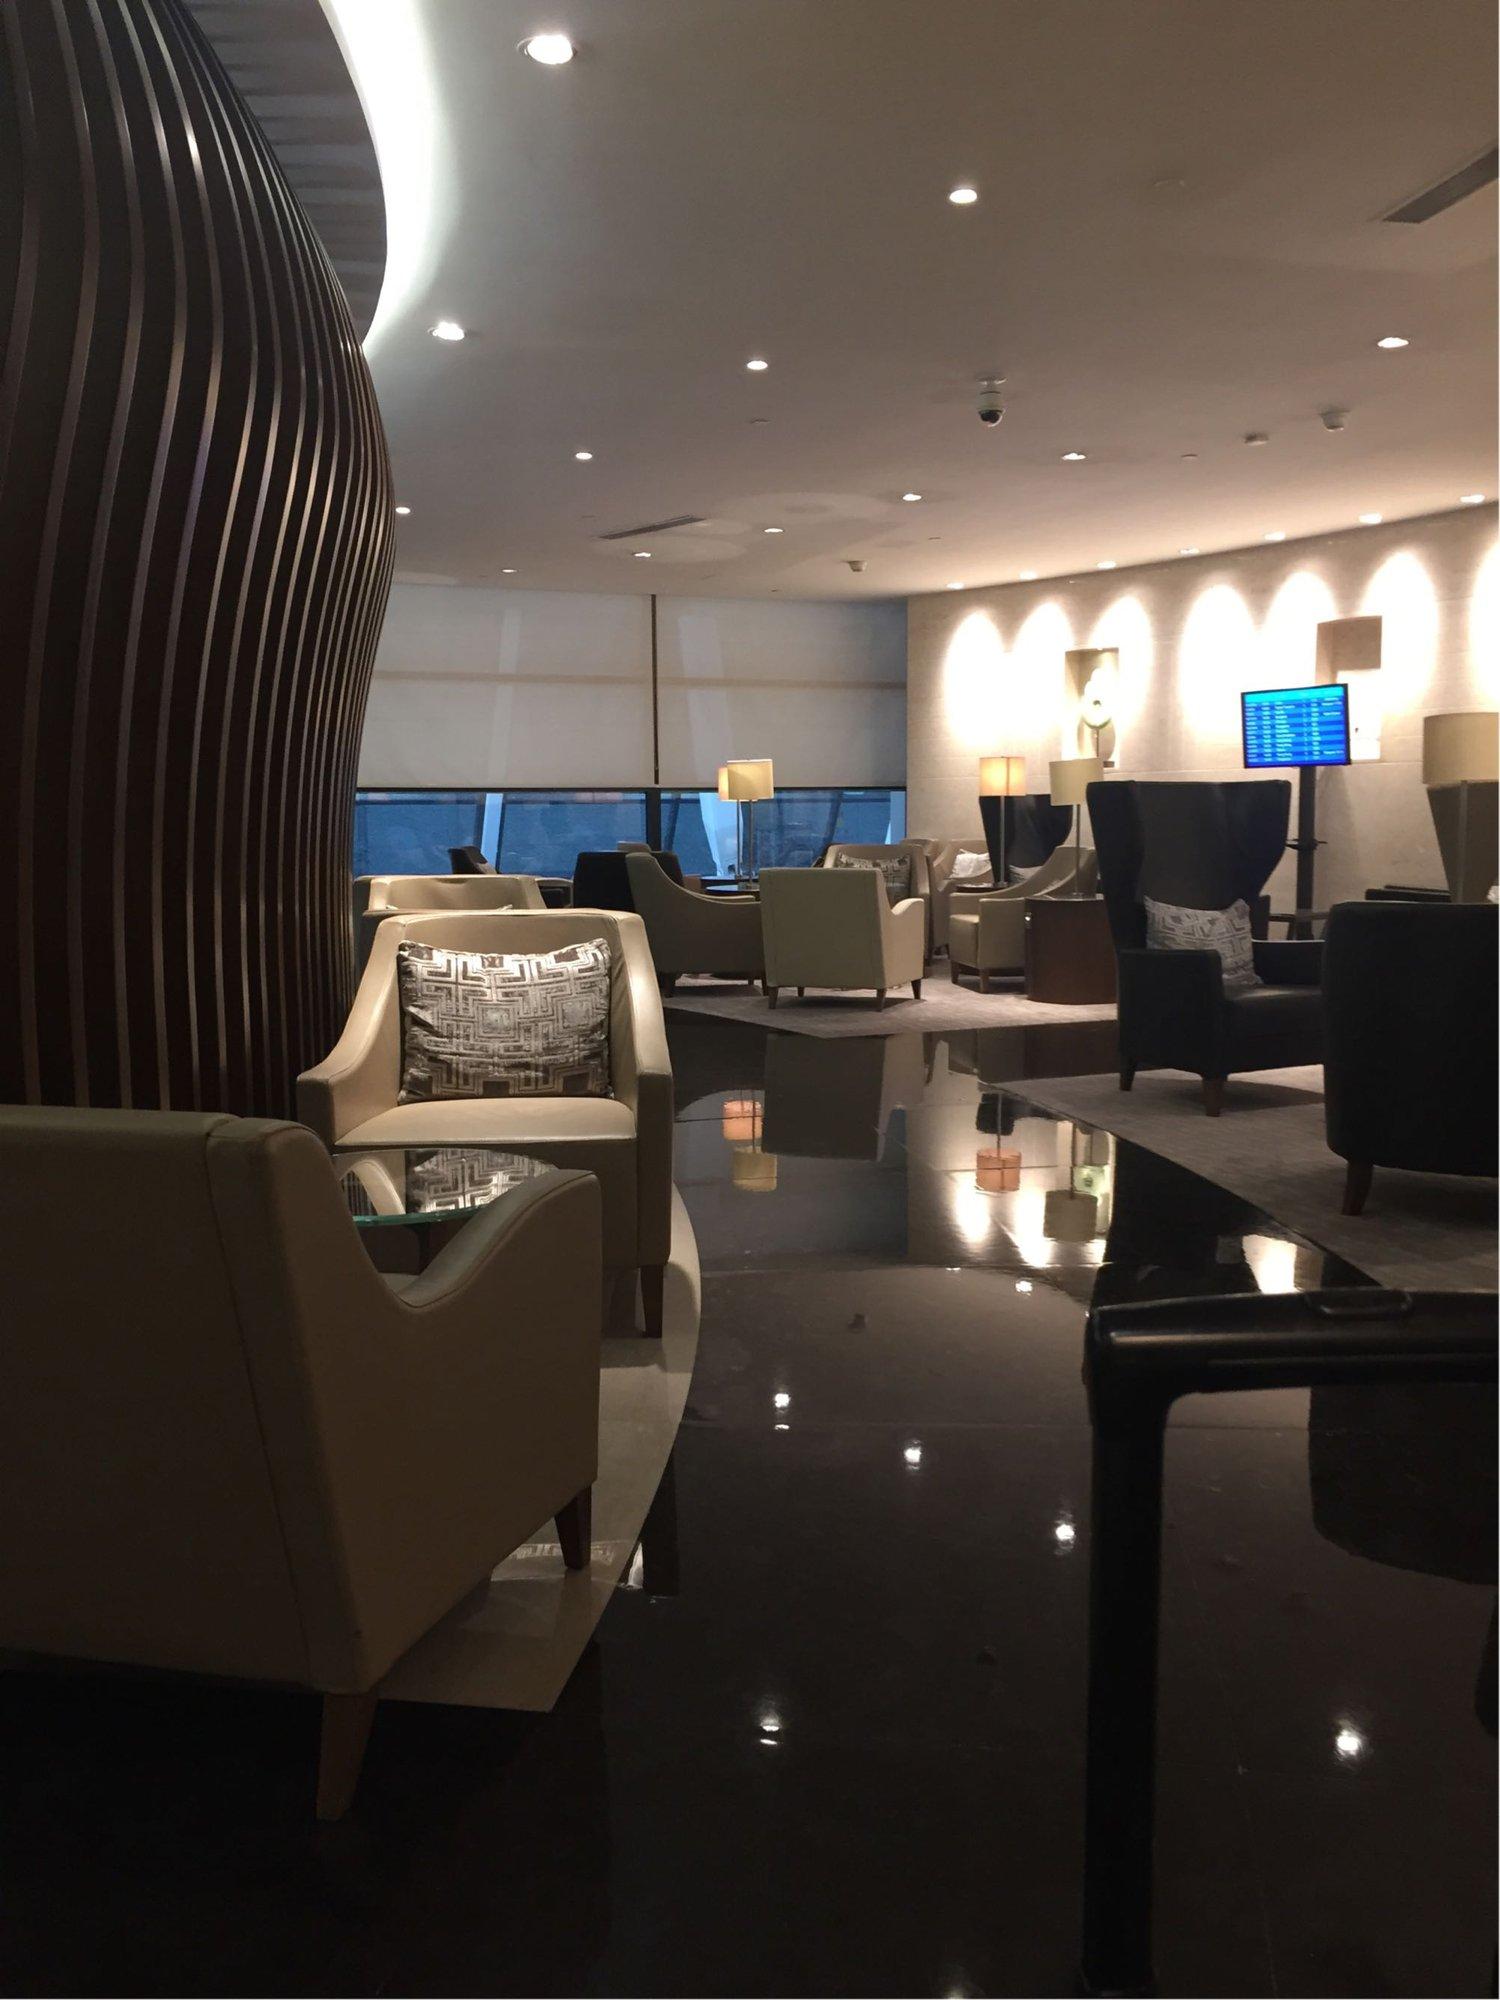 No. 71 Air China First Class Lounge image 1 of 10